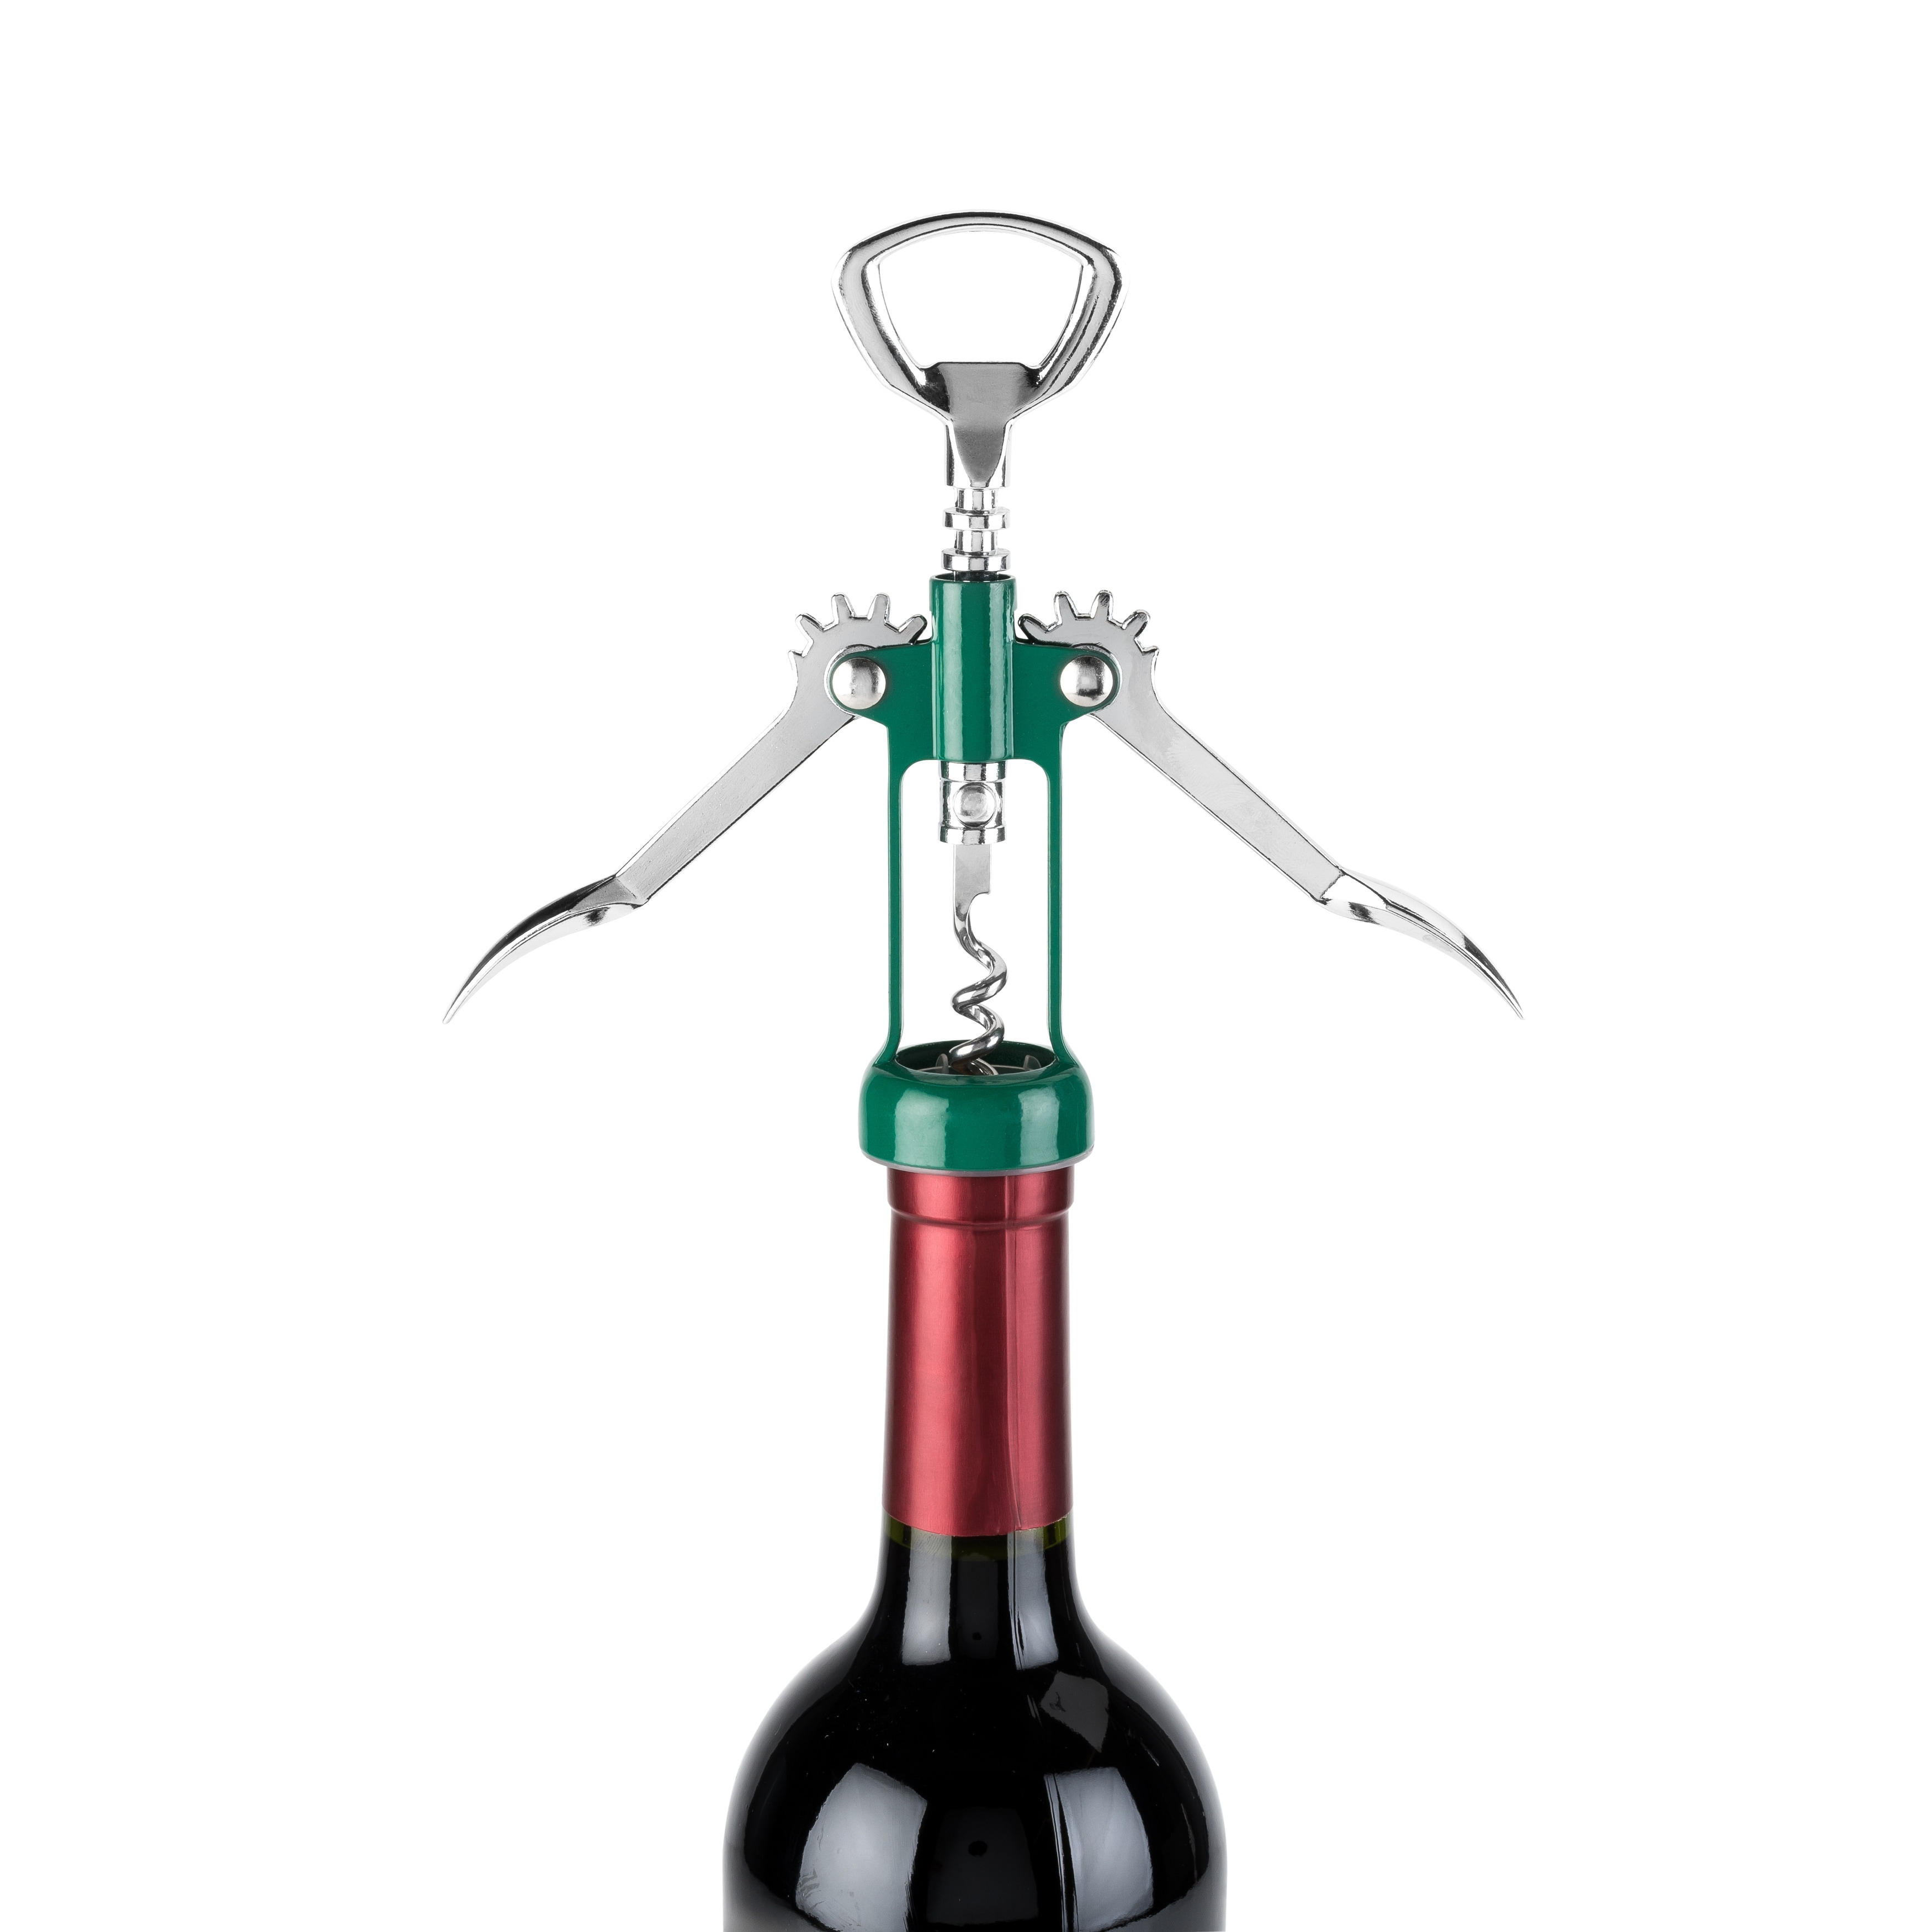 https://ak1.ostkcdn.com/images/products/is/images/direct/ce1ff6a2b2a4a216e76c7fe84a4fda7de59cf13f/True-Soar-Green-Winged-Corkscrew%2C-Self-Centering-Worm%2C-Bottle-Opener.jpg